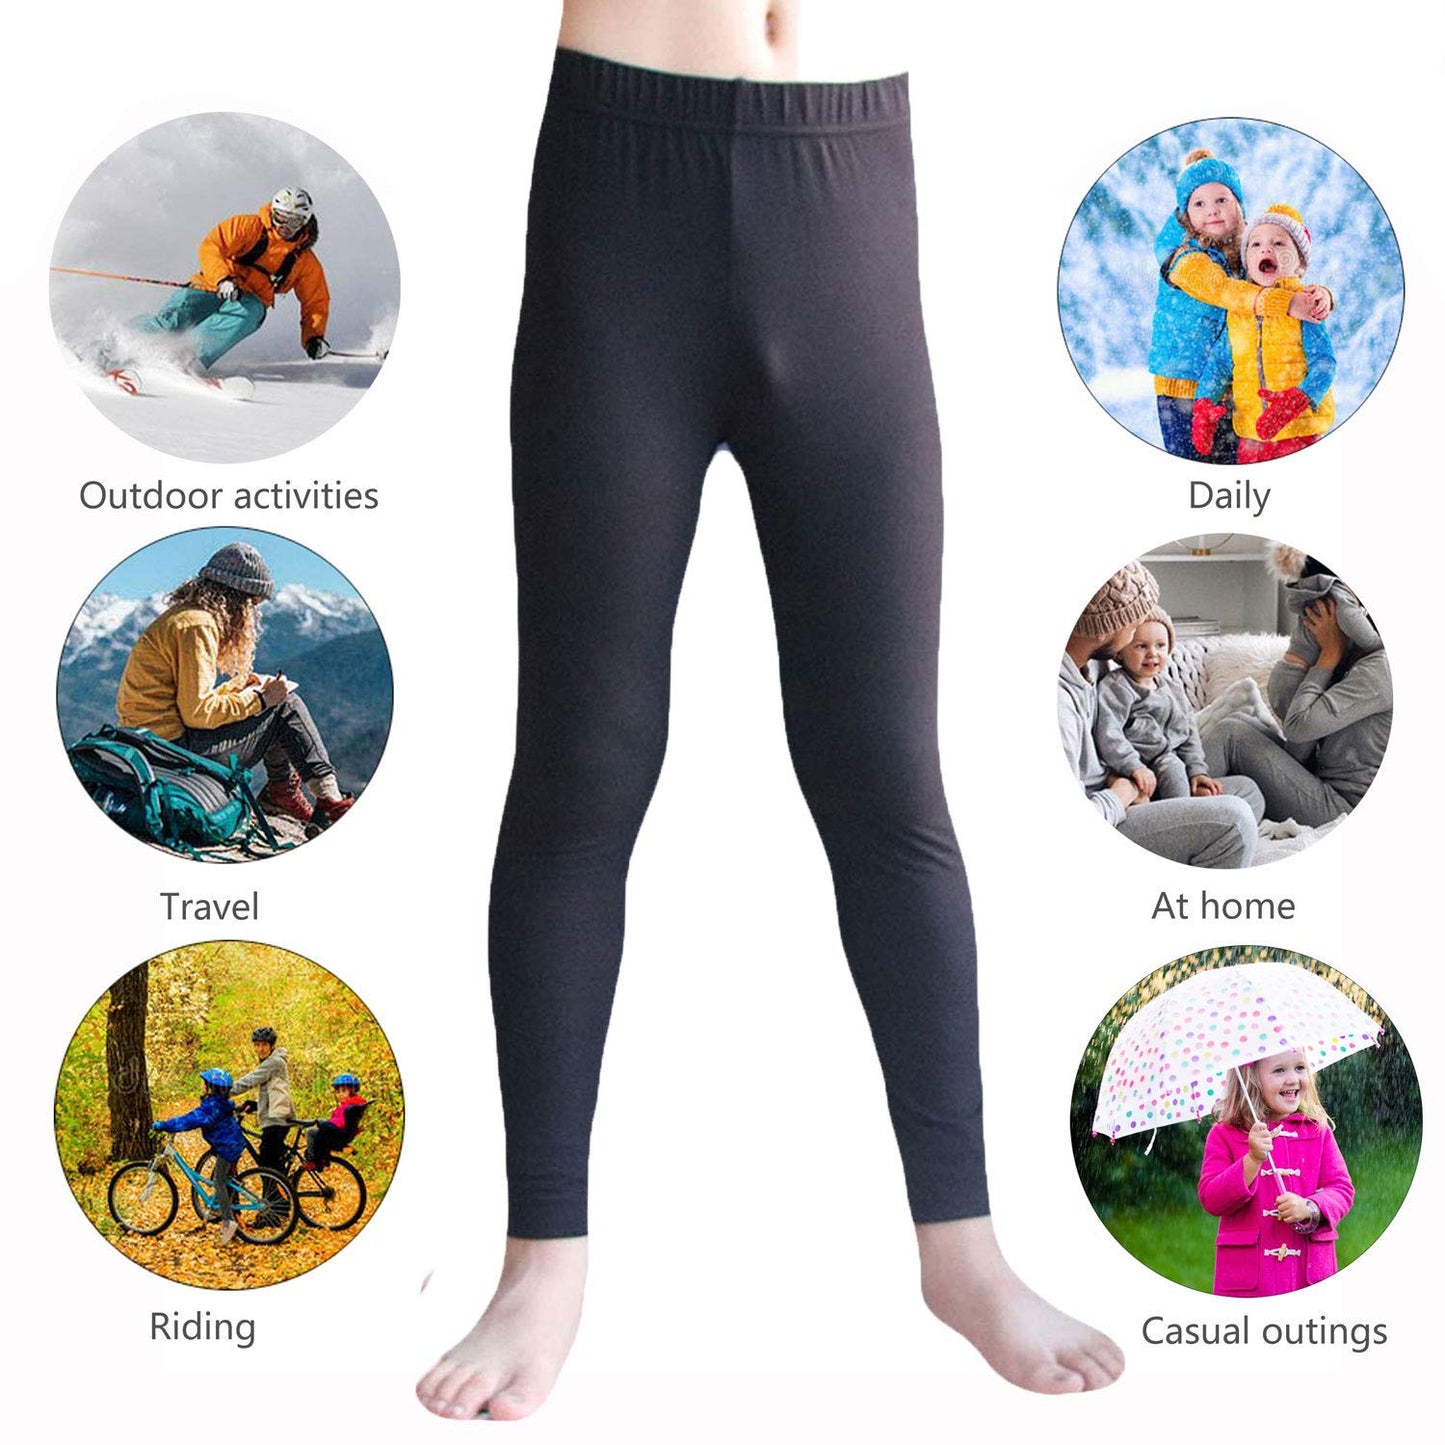 YUSHOW Boys Thermal Pants Unisex Long John Base Layer Underwear Bottoms Insulated for Outdoor Ski Warmth/Extreme Cold Pajamas Size Large